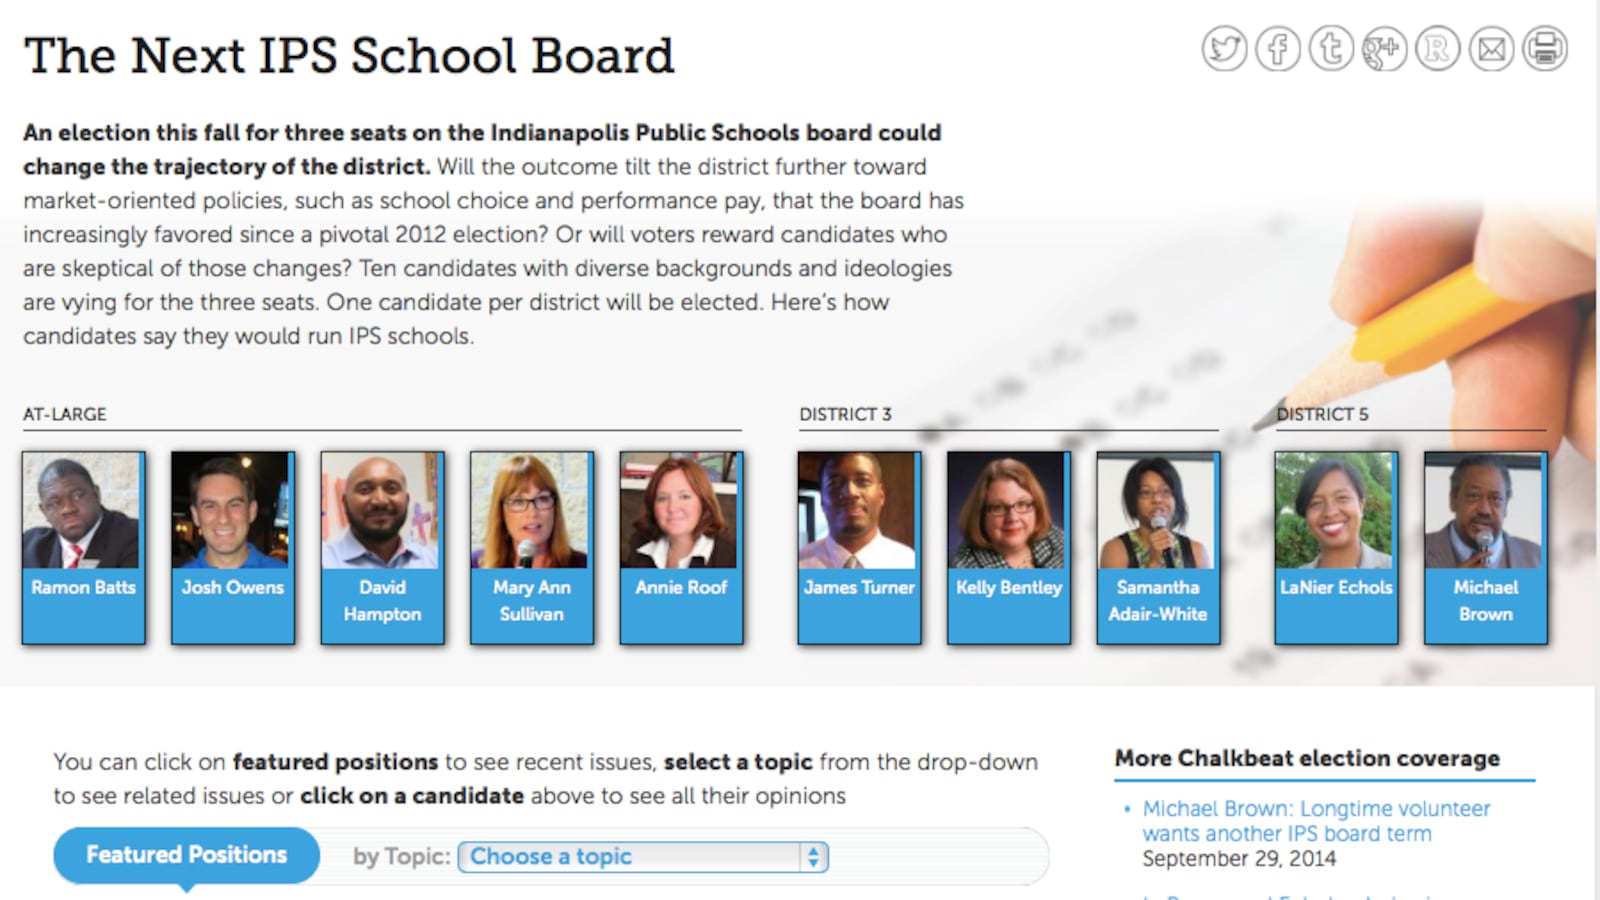 Chalkbeat's election tracker helped voters navigate their choices for IPS school board last fall.